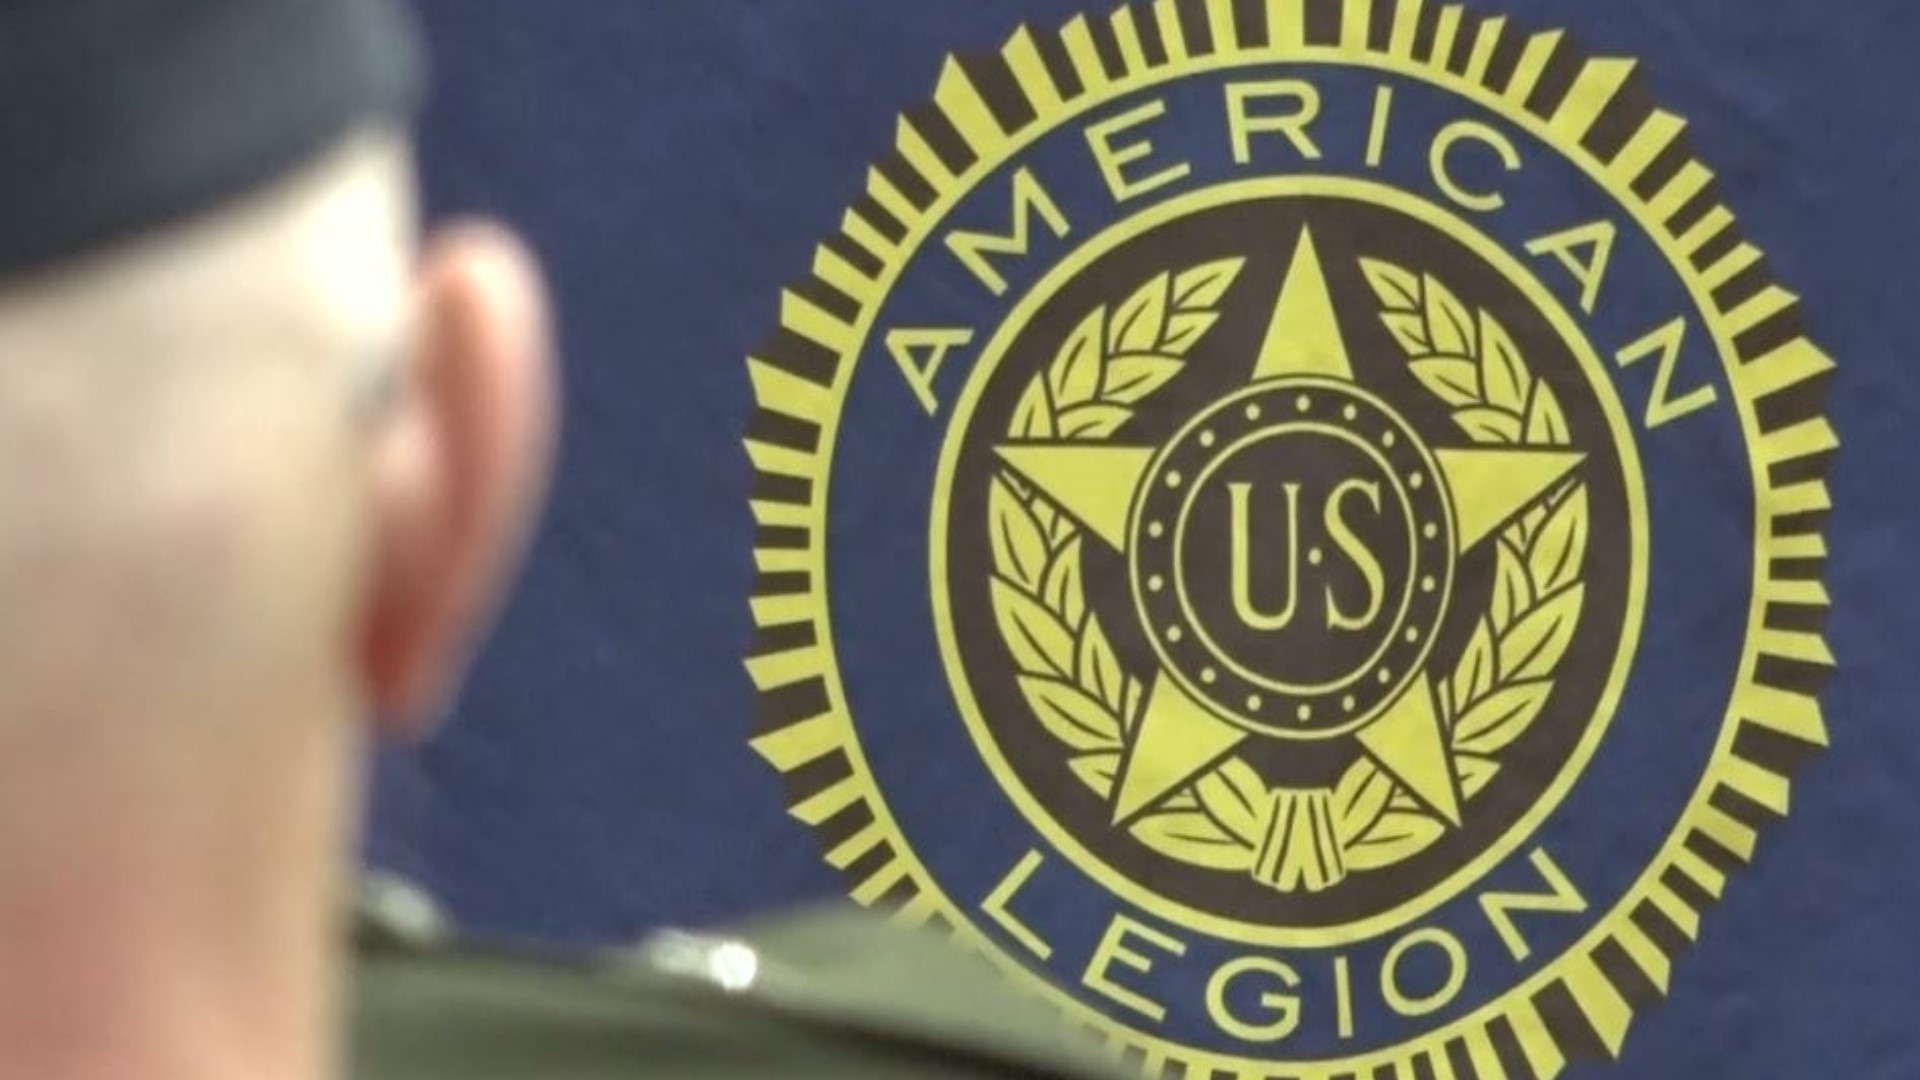 The American Legion Post 159 hosted resource fairs prior to the pandemic, but an organizer says this one brings in more local veterans this time around.